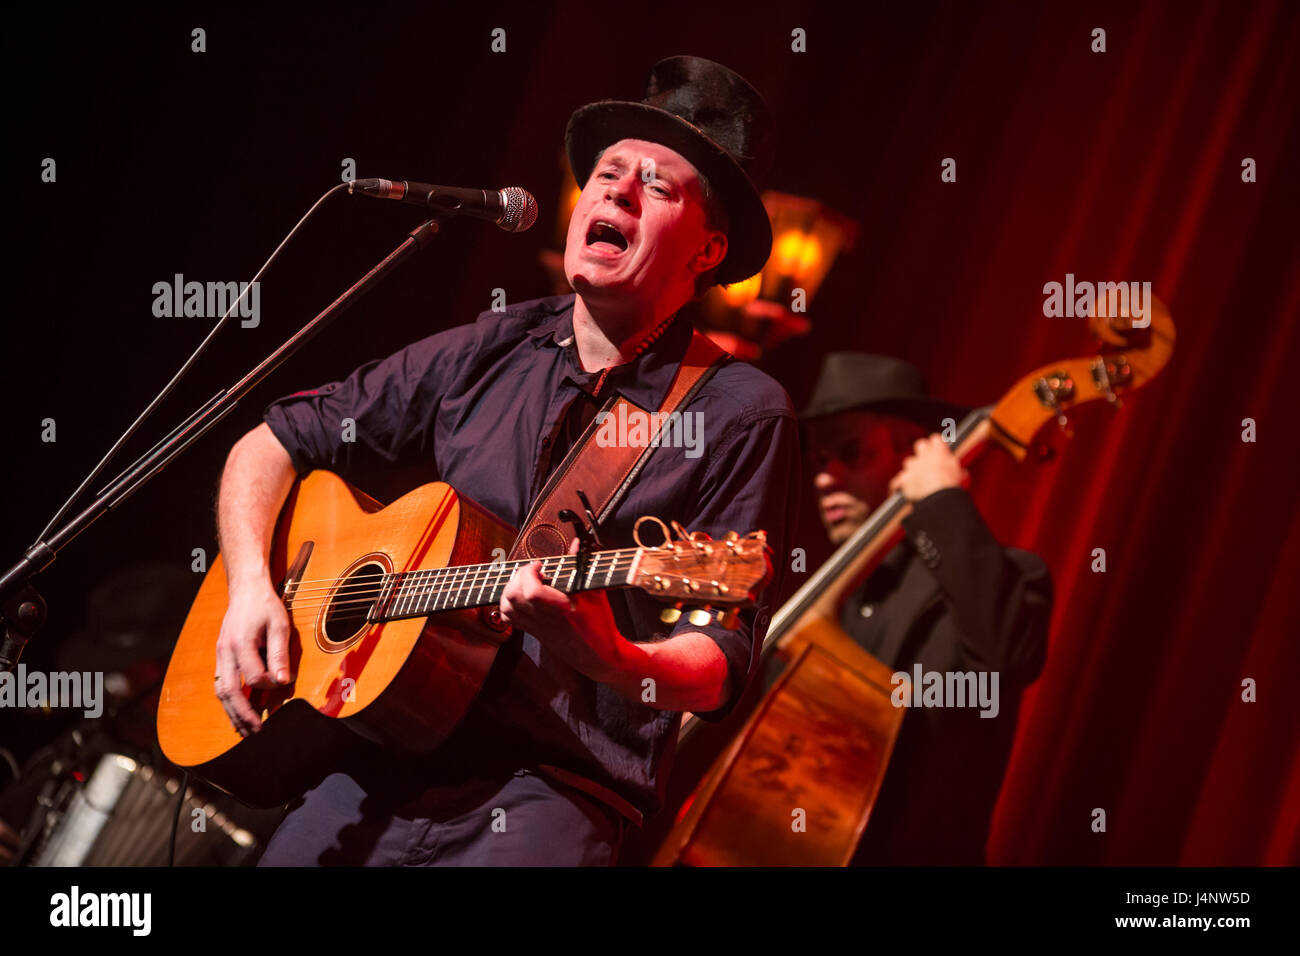 Marburg, Germany. 11.05.2017. Jimmy Kelly and Band, The Streetkid Vol. 2 Tour, concert in Waggonhalle Marburg. Jimmy Kelly - in the last years performing as busker/street performer - is know as member of folk and pop band The Kelly Family. In picture: Jimmy Kelly (left), Johannes Vos (rear, bass) --- Fotocredit: Christian Lademann Stock Photo